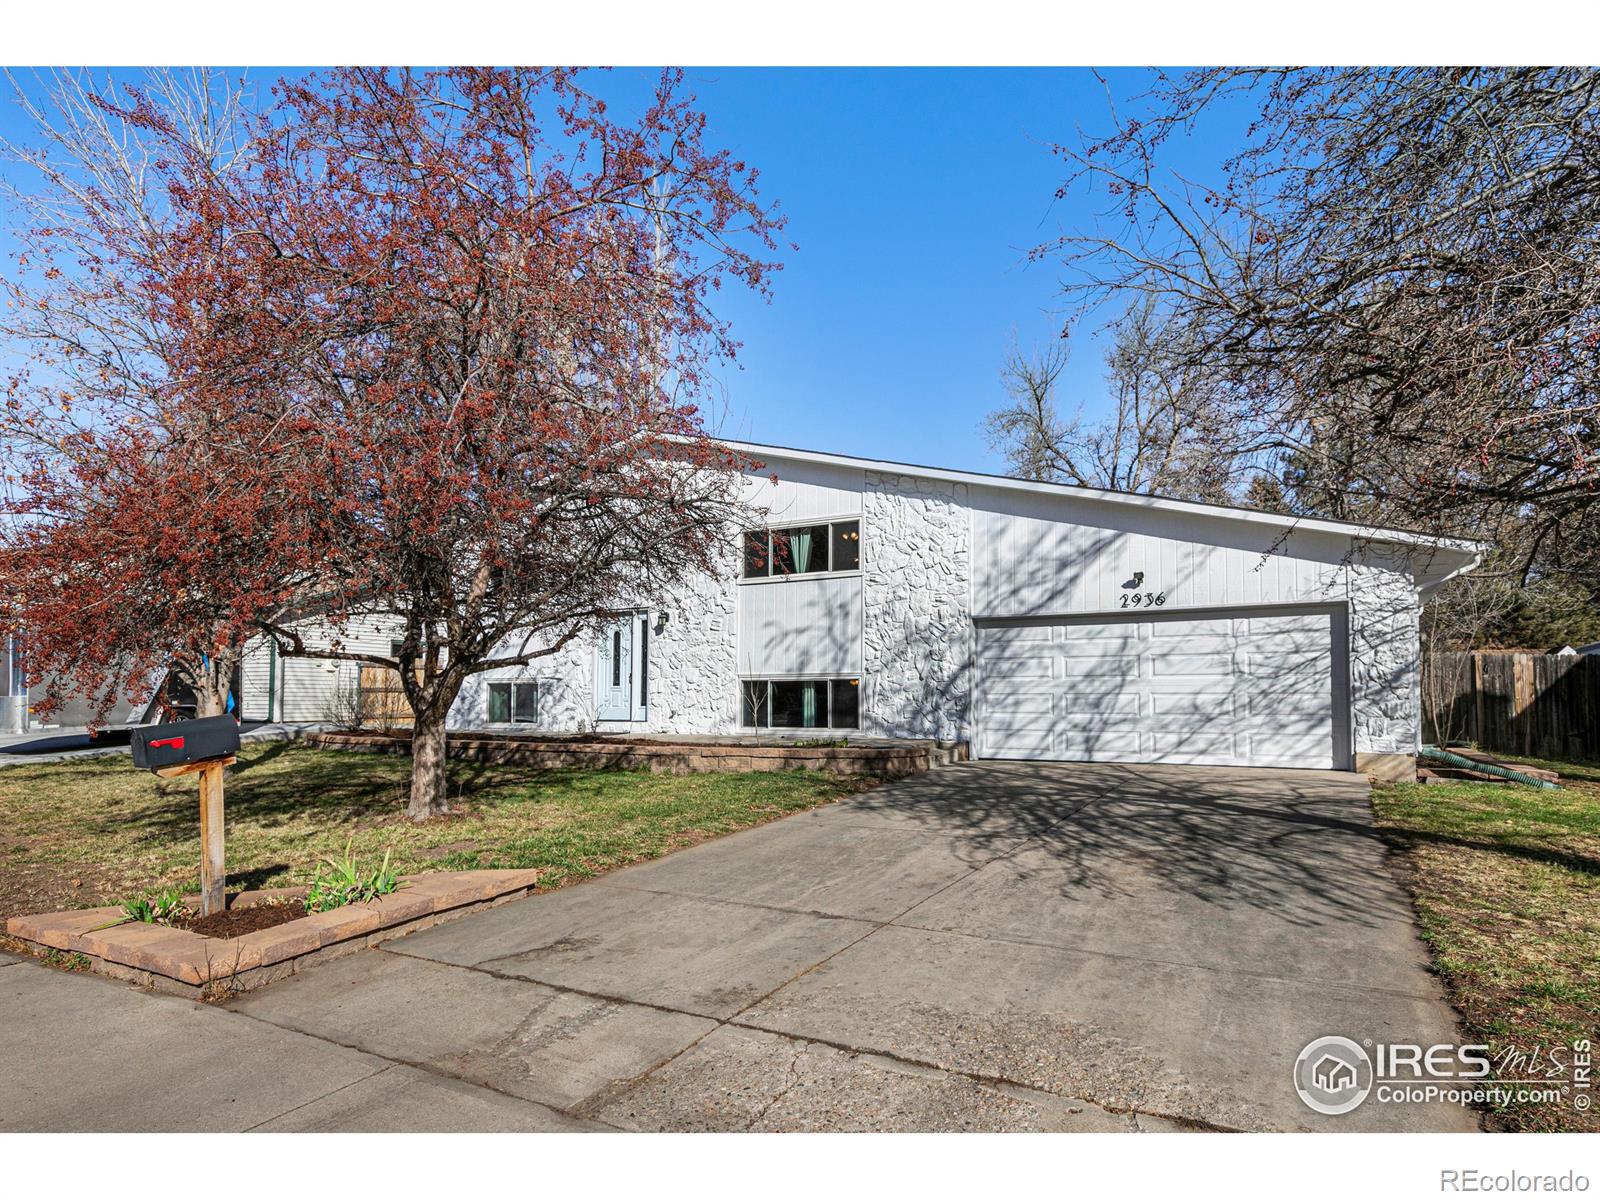 2936  Southmoor Drive, fort collins MLS: 4567891004564 Beds: 4 Baths: 2 Price: $564,000